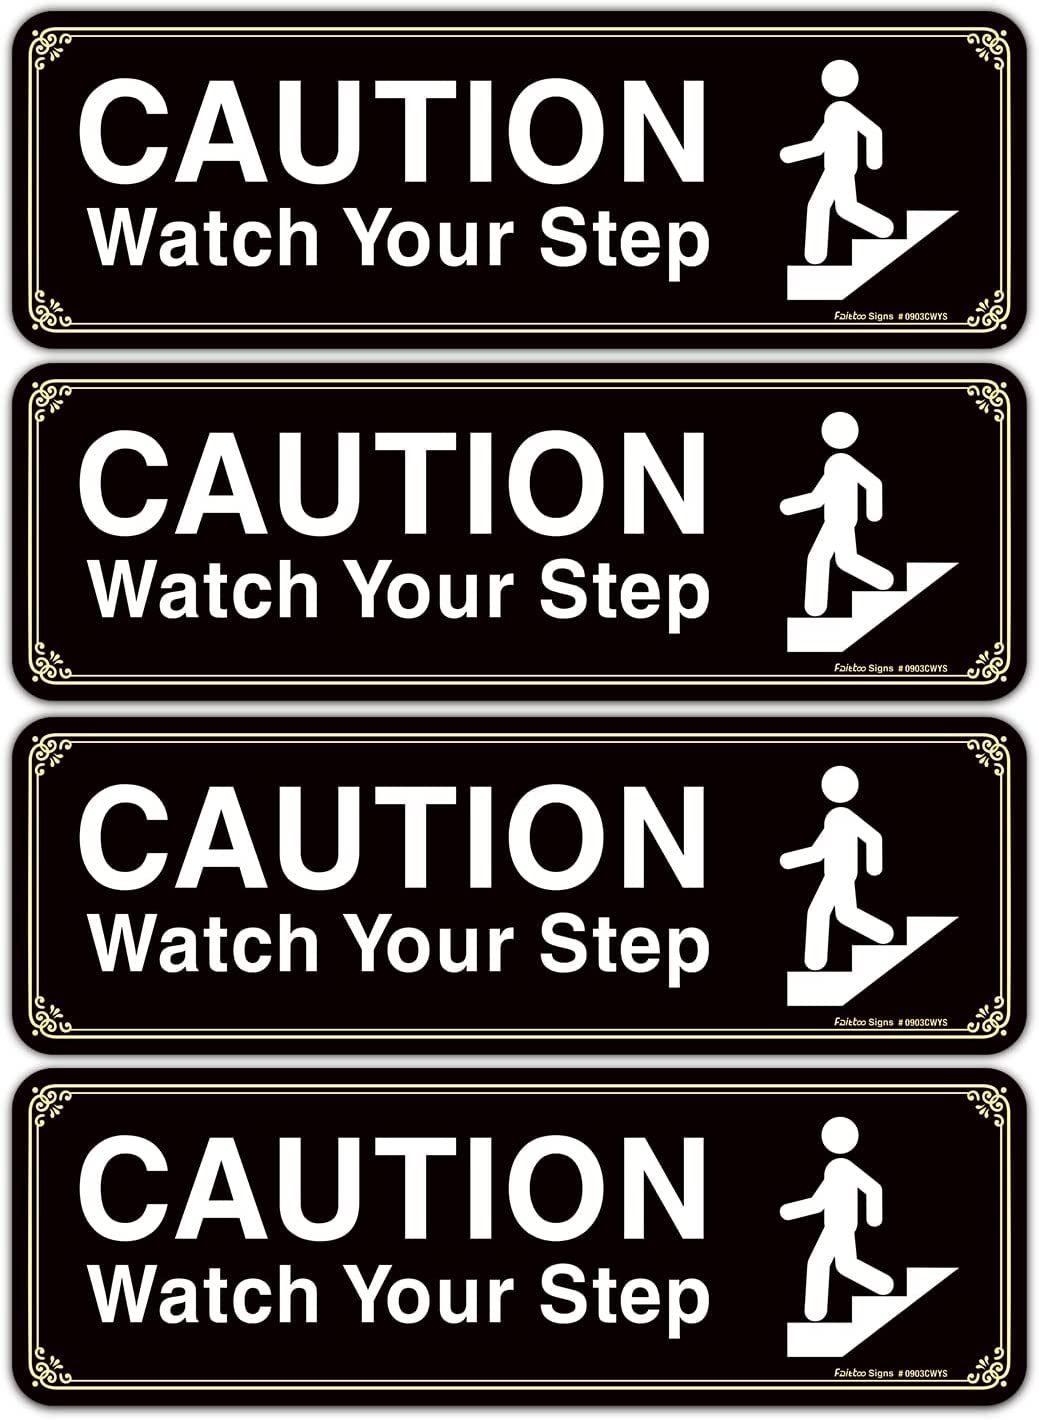 Caution Watch Your Step Sign, (4 Pack) 9 X 3 Inch, Self-Adhesive, Use for Home Office/Business, Easy to Apply, White Big Letters on Black Plate